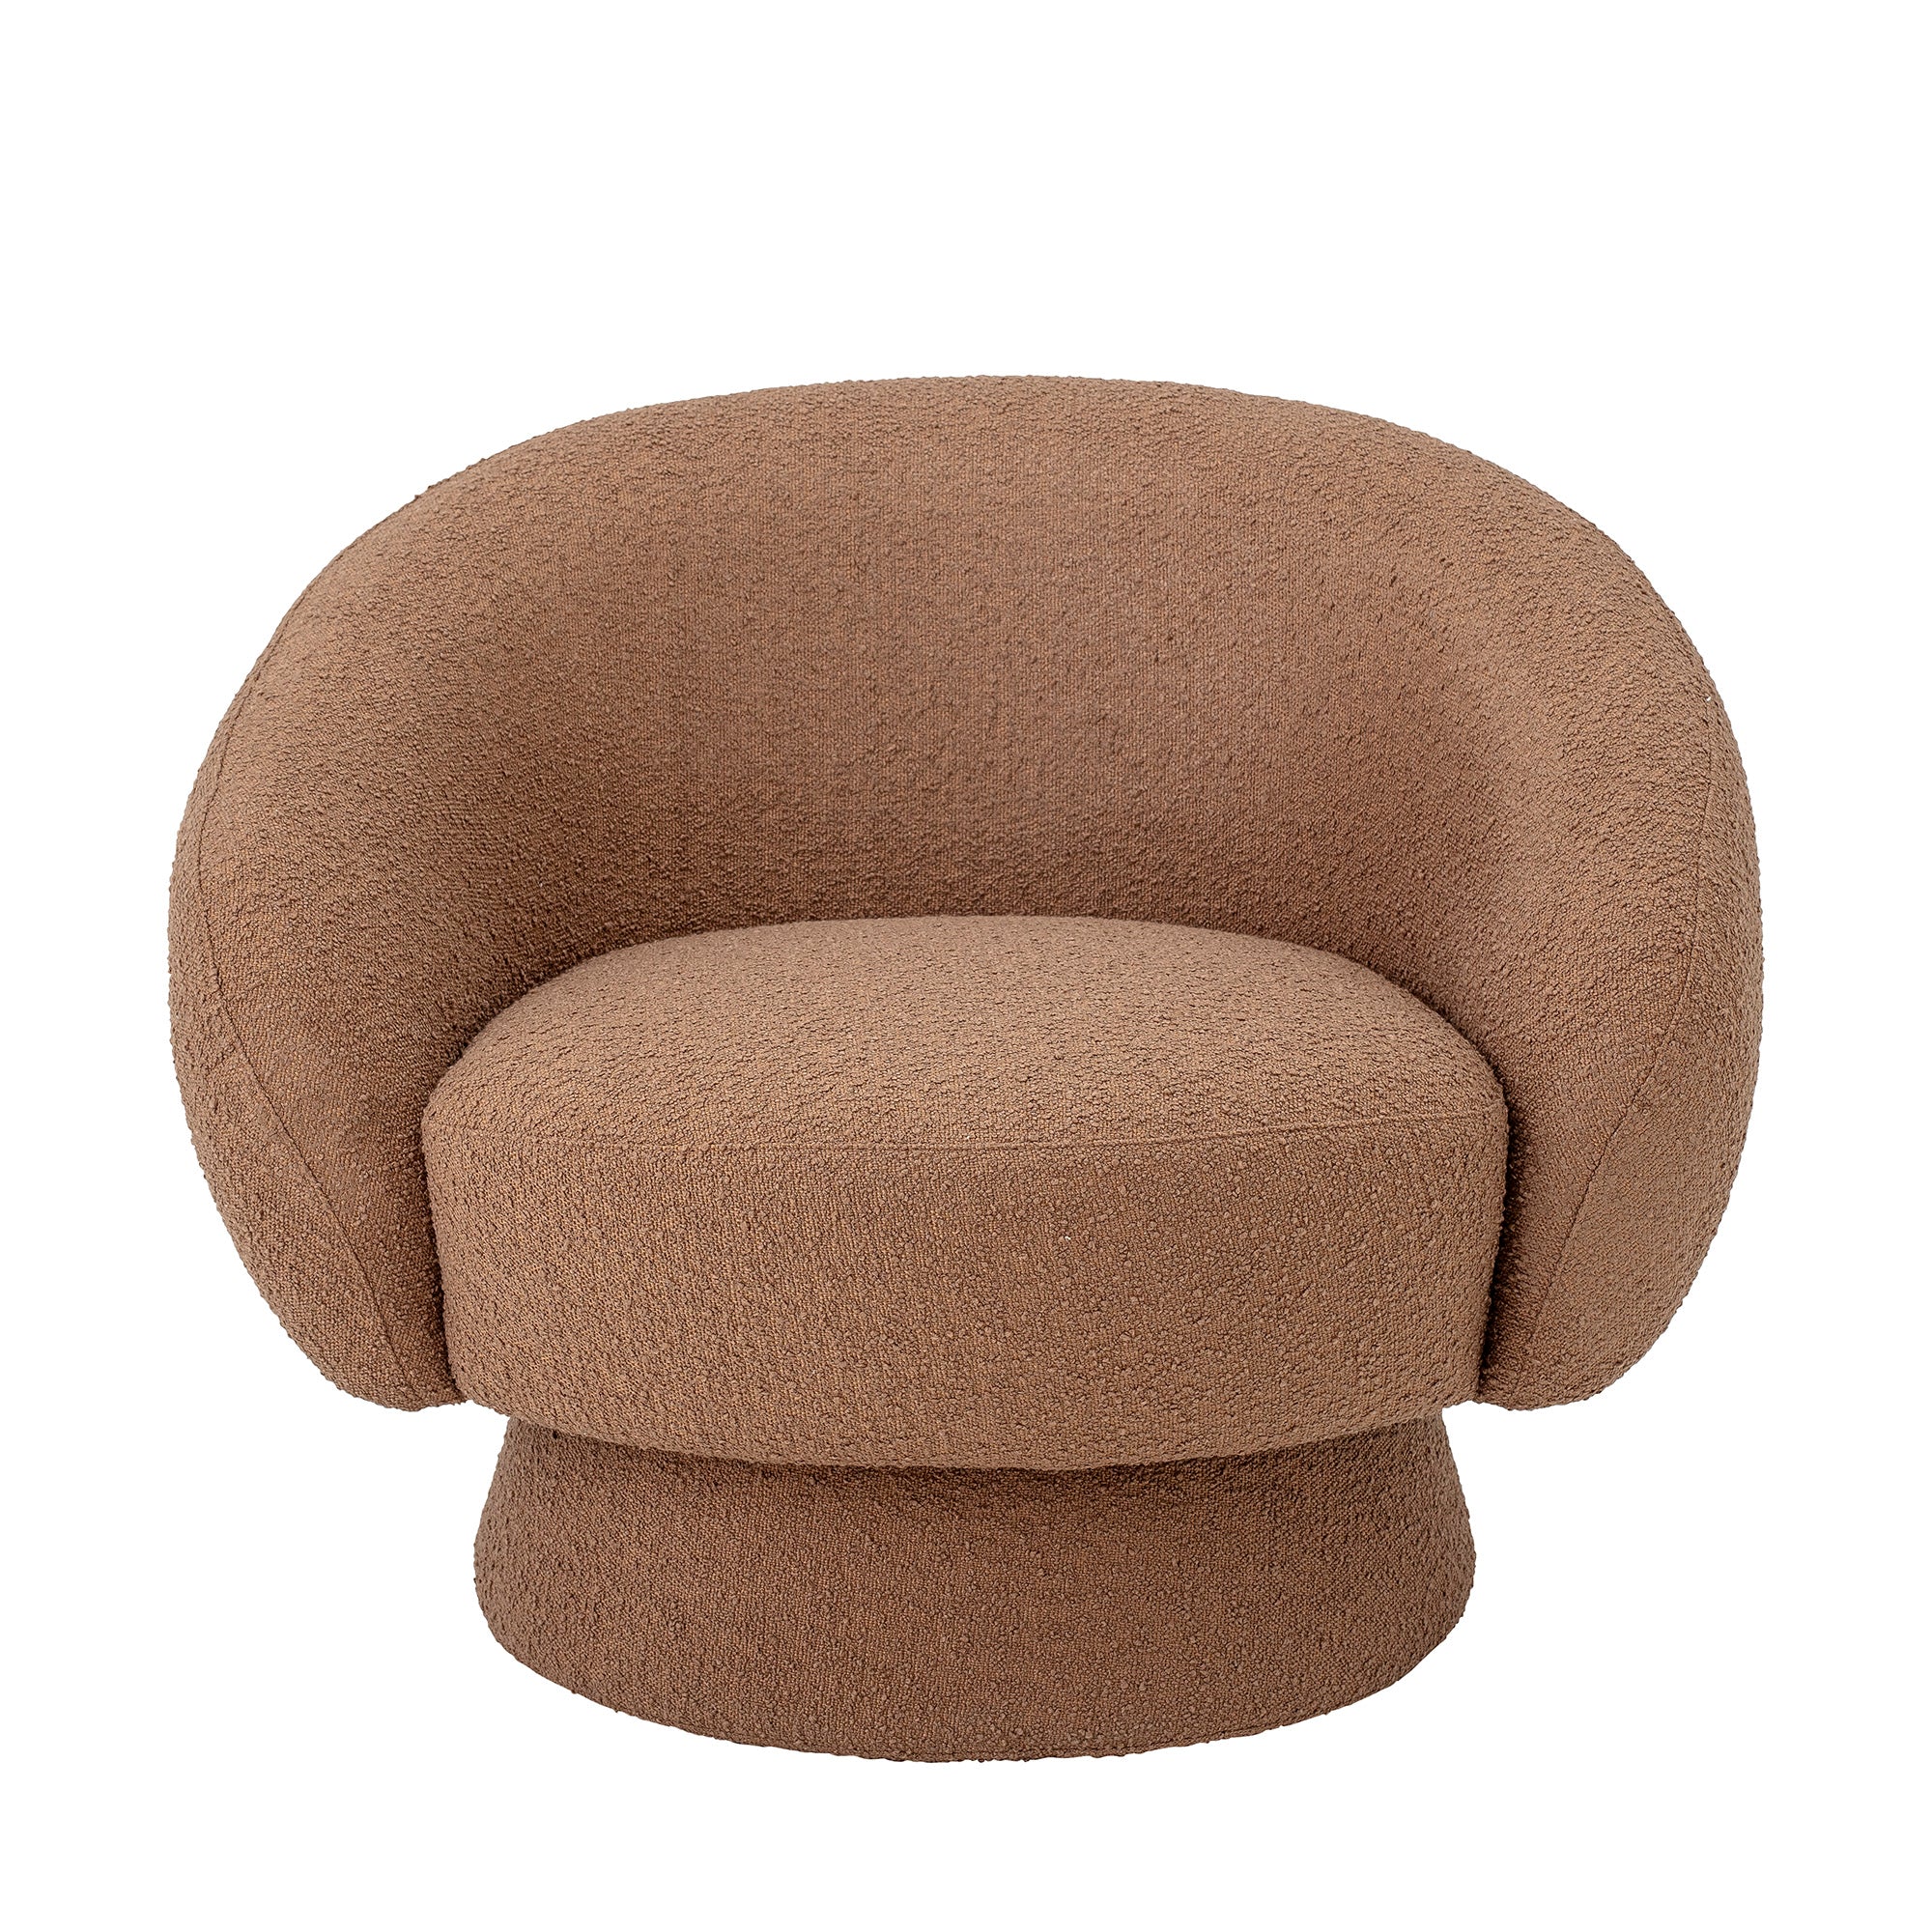 Ted Loungesessel, Braun, Polyester